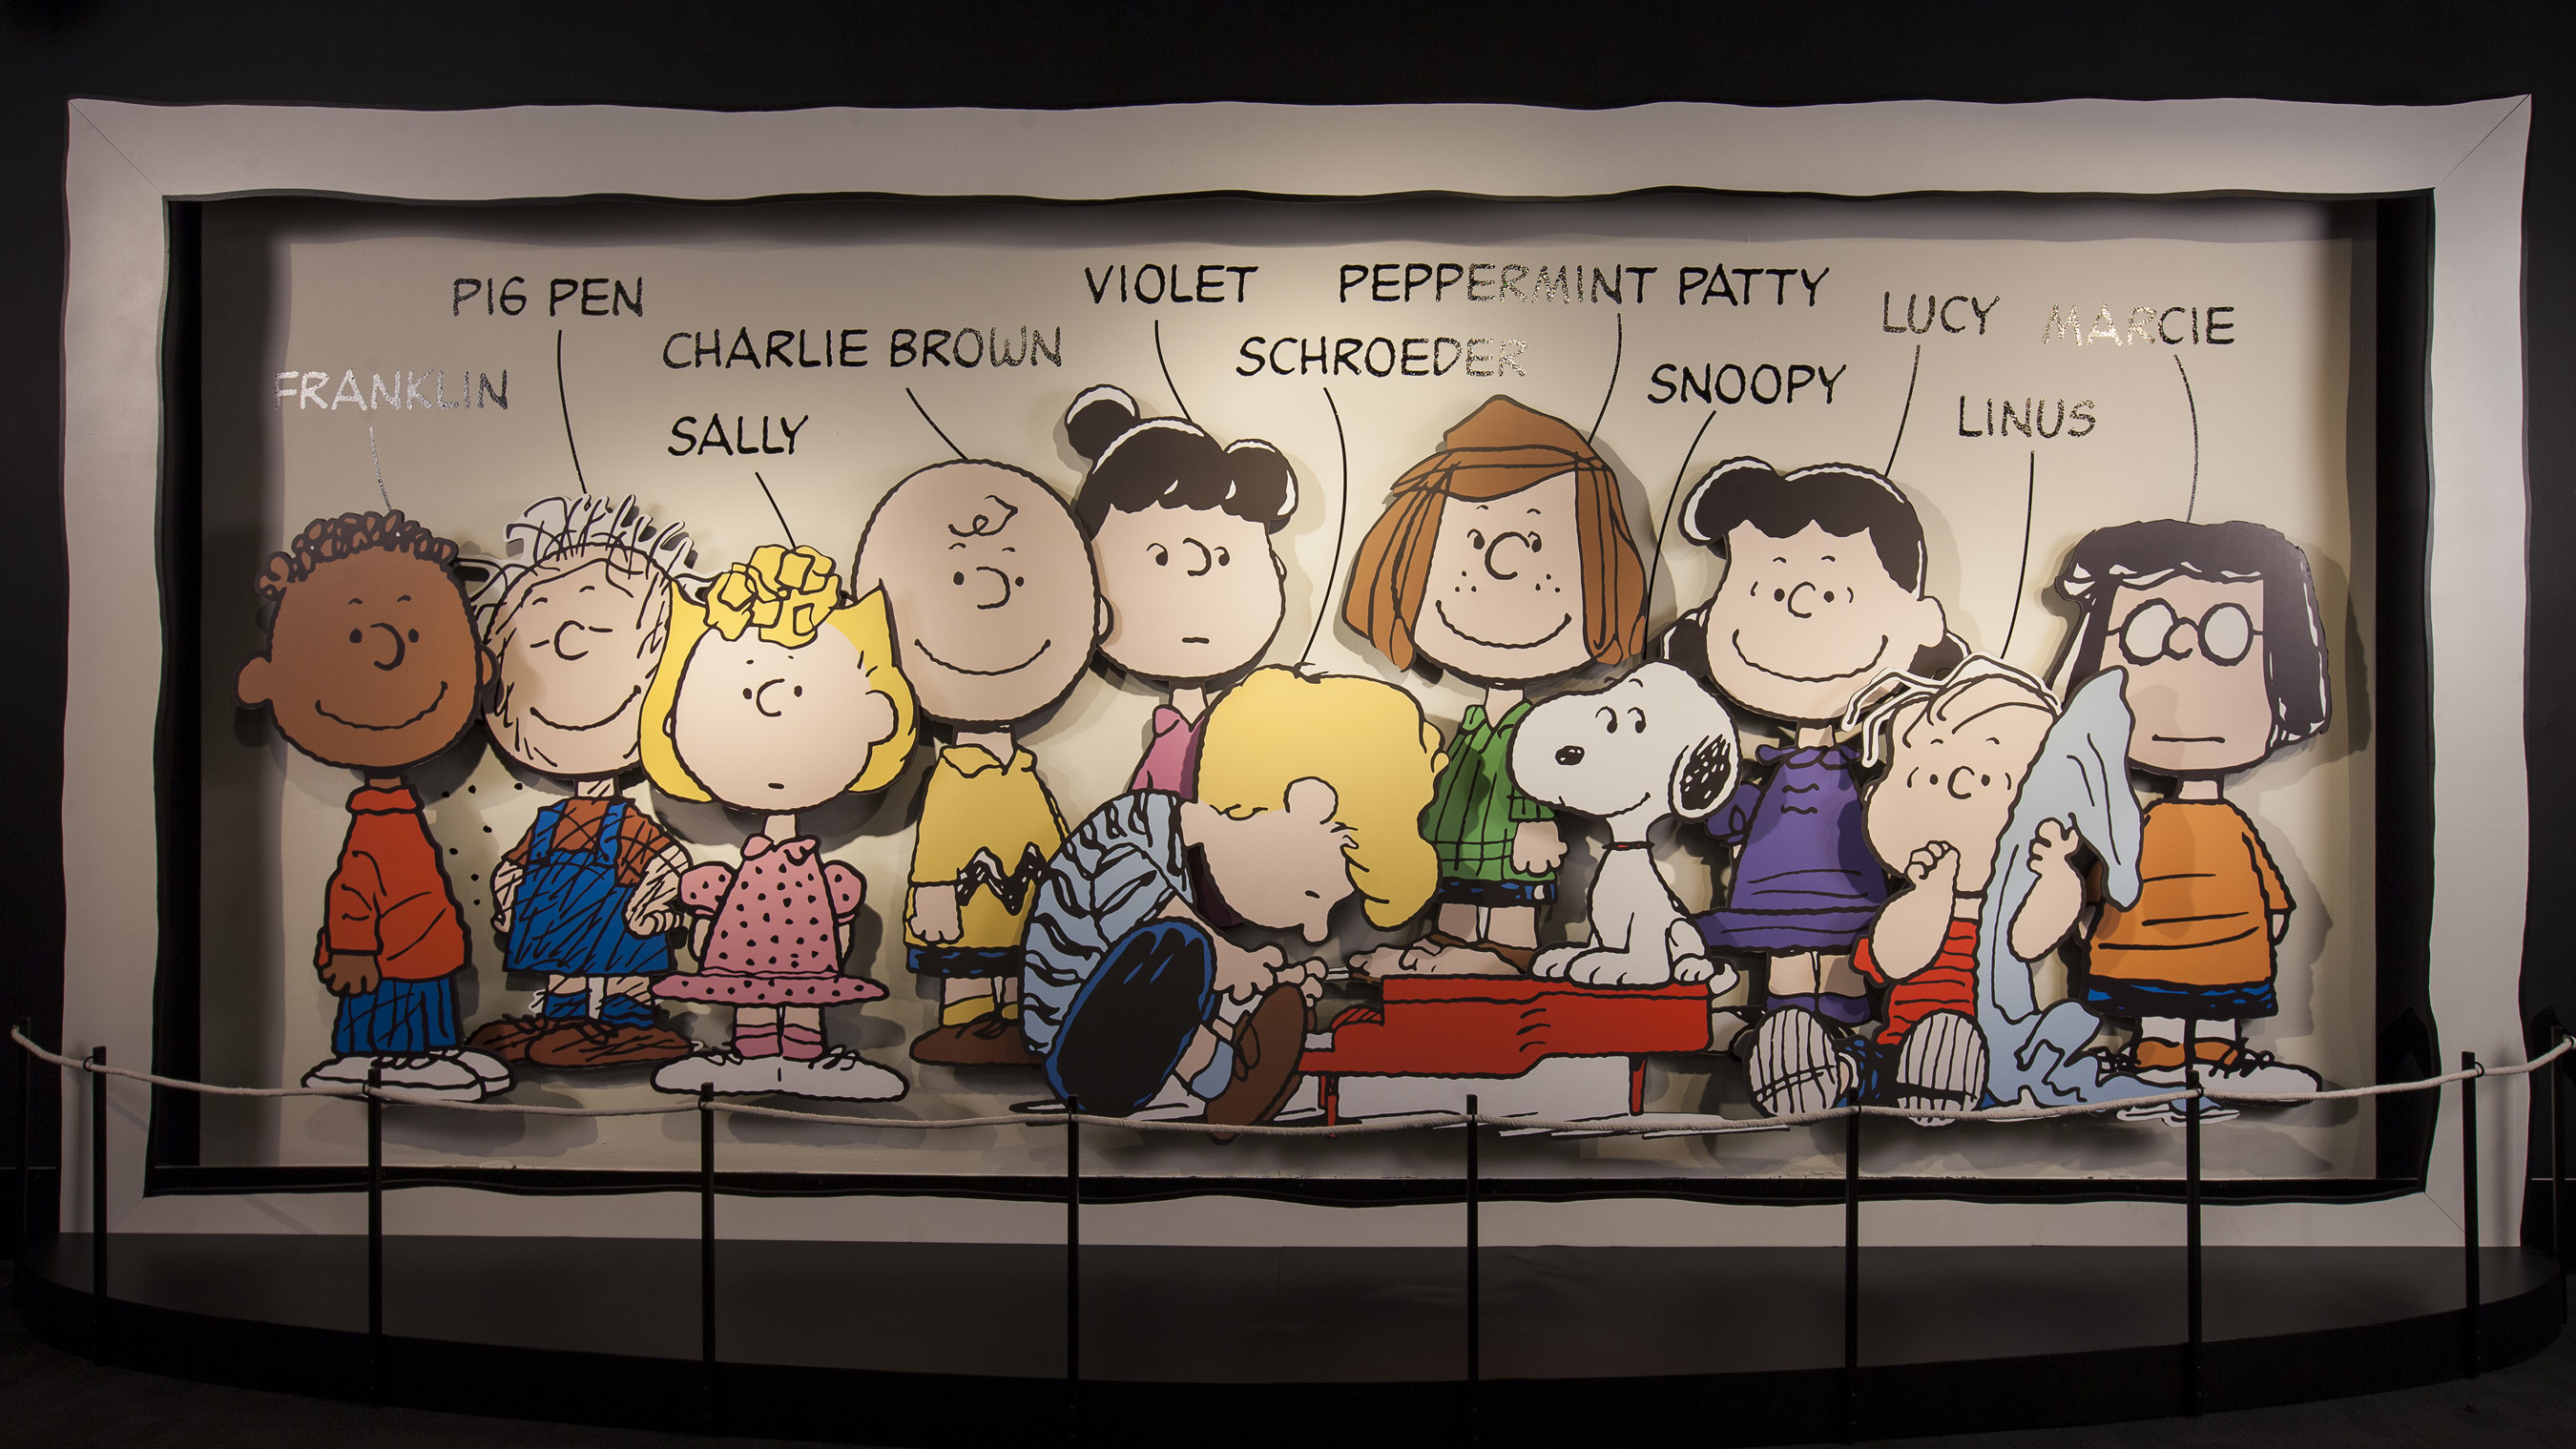 2700x1519 First Look: “Charlie Brown and The Great Exhibit” at the Museum of .